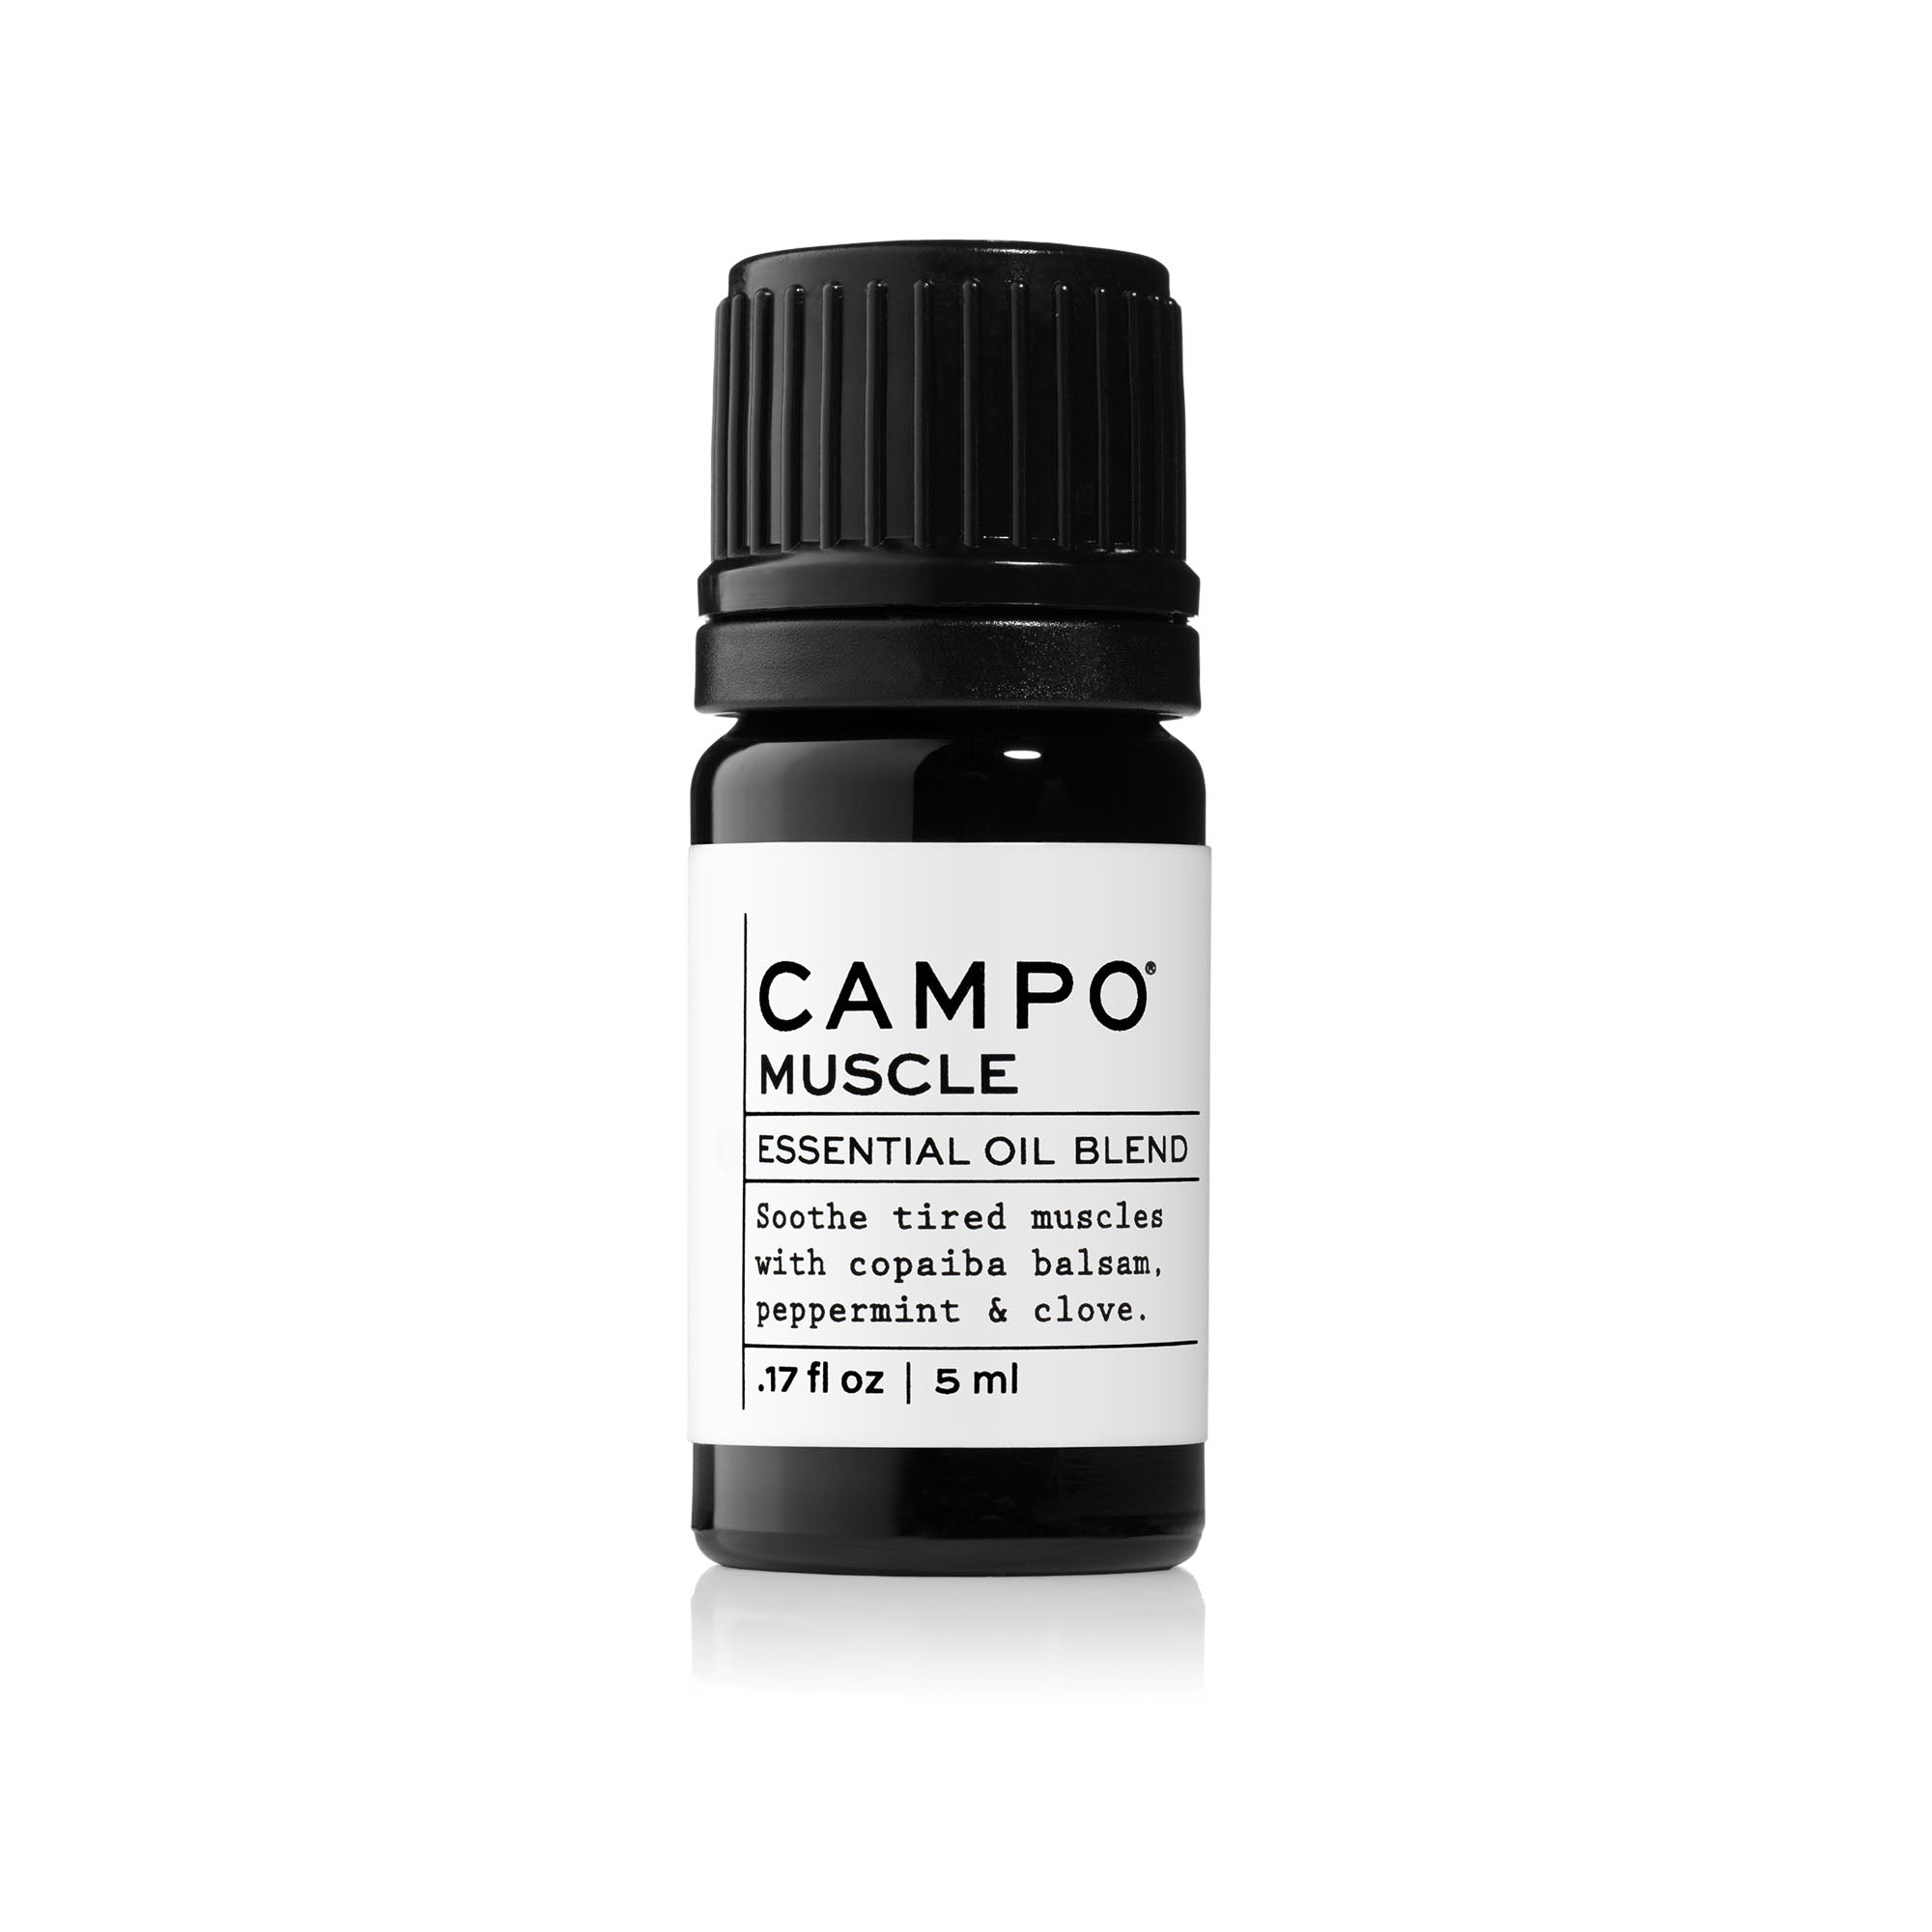 https://cdn.shopify.com/s/files/1/2102/8929/products/CAMPO_MUSCLE_PUREBLEND_5ML_2000x2000_4c96fce0-7a7a-40e1-a3c3-e849c3ba6500_2000x.jpg?v=1657227618